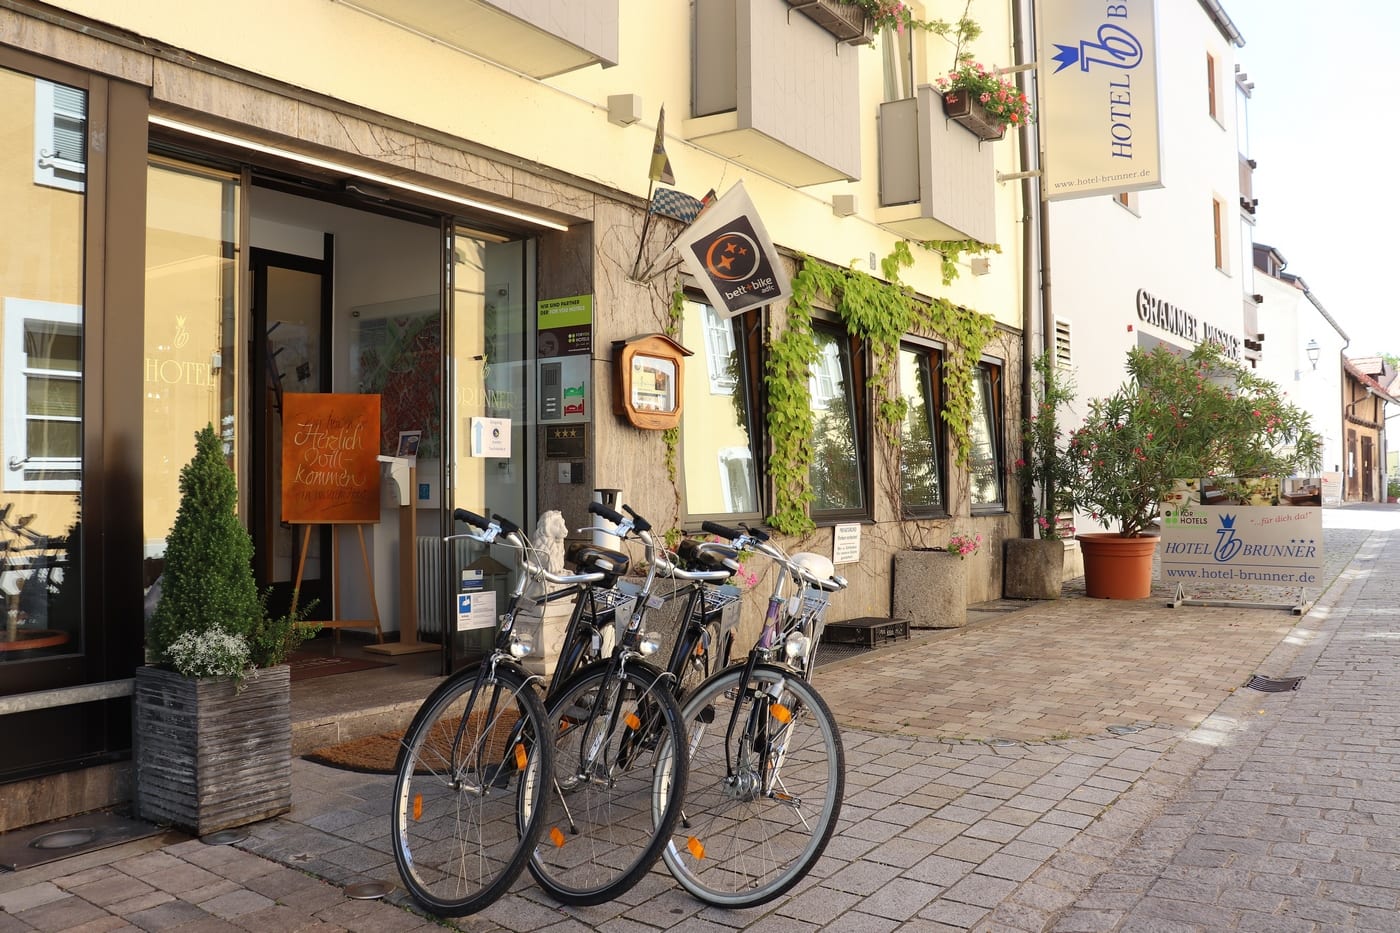 Starting point for beautiful bike tours: Hotel Brunner in Amberg